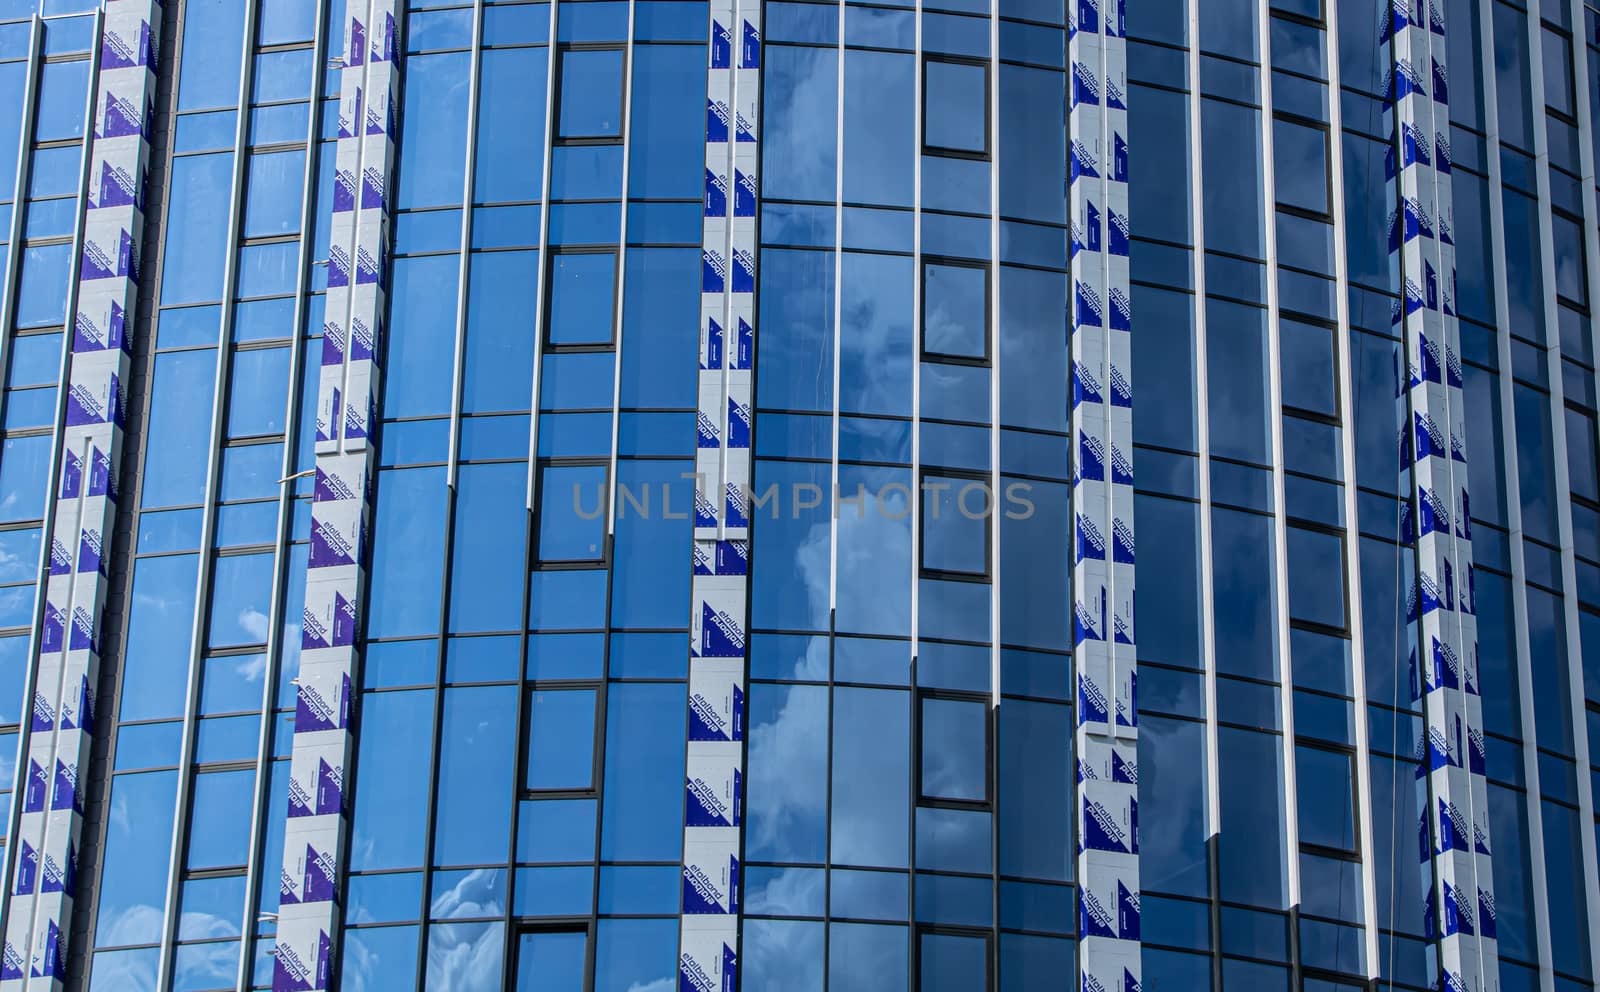 Chisinau, Moldova - July 14, 2019. A luxurious building texture close up by Mindru